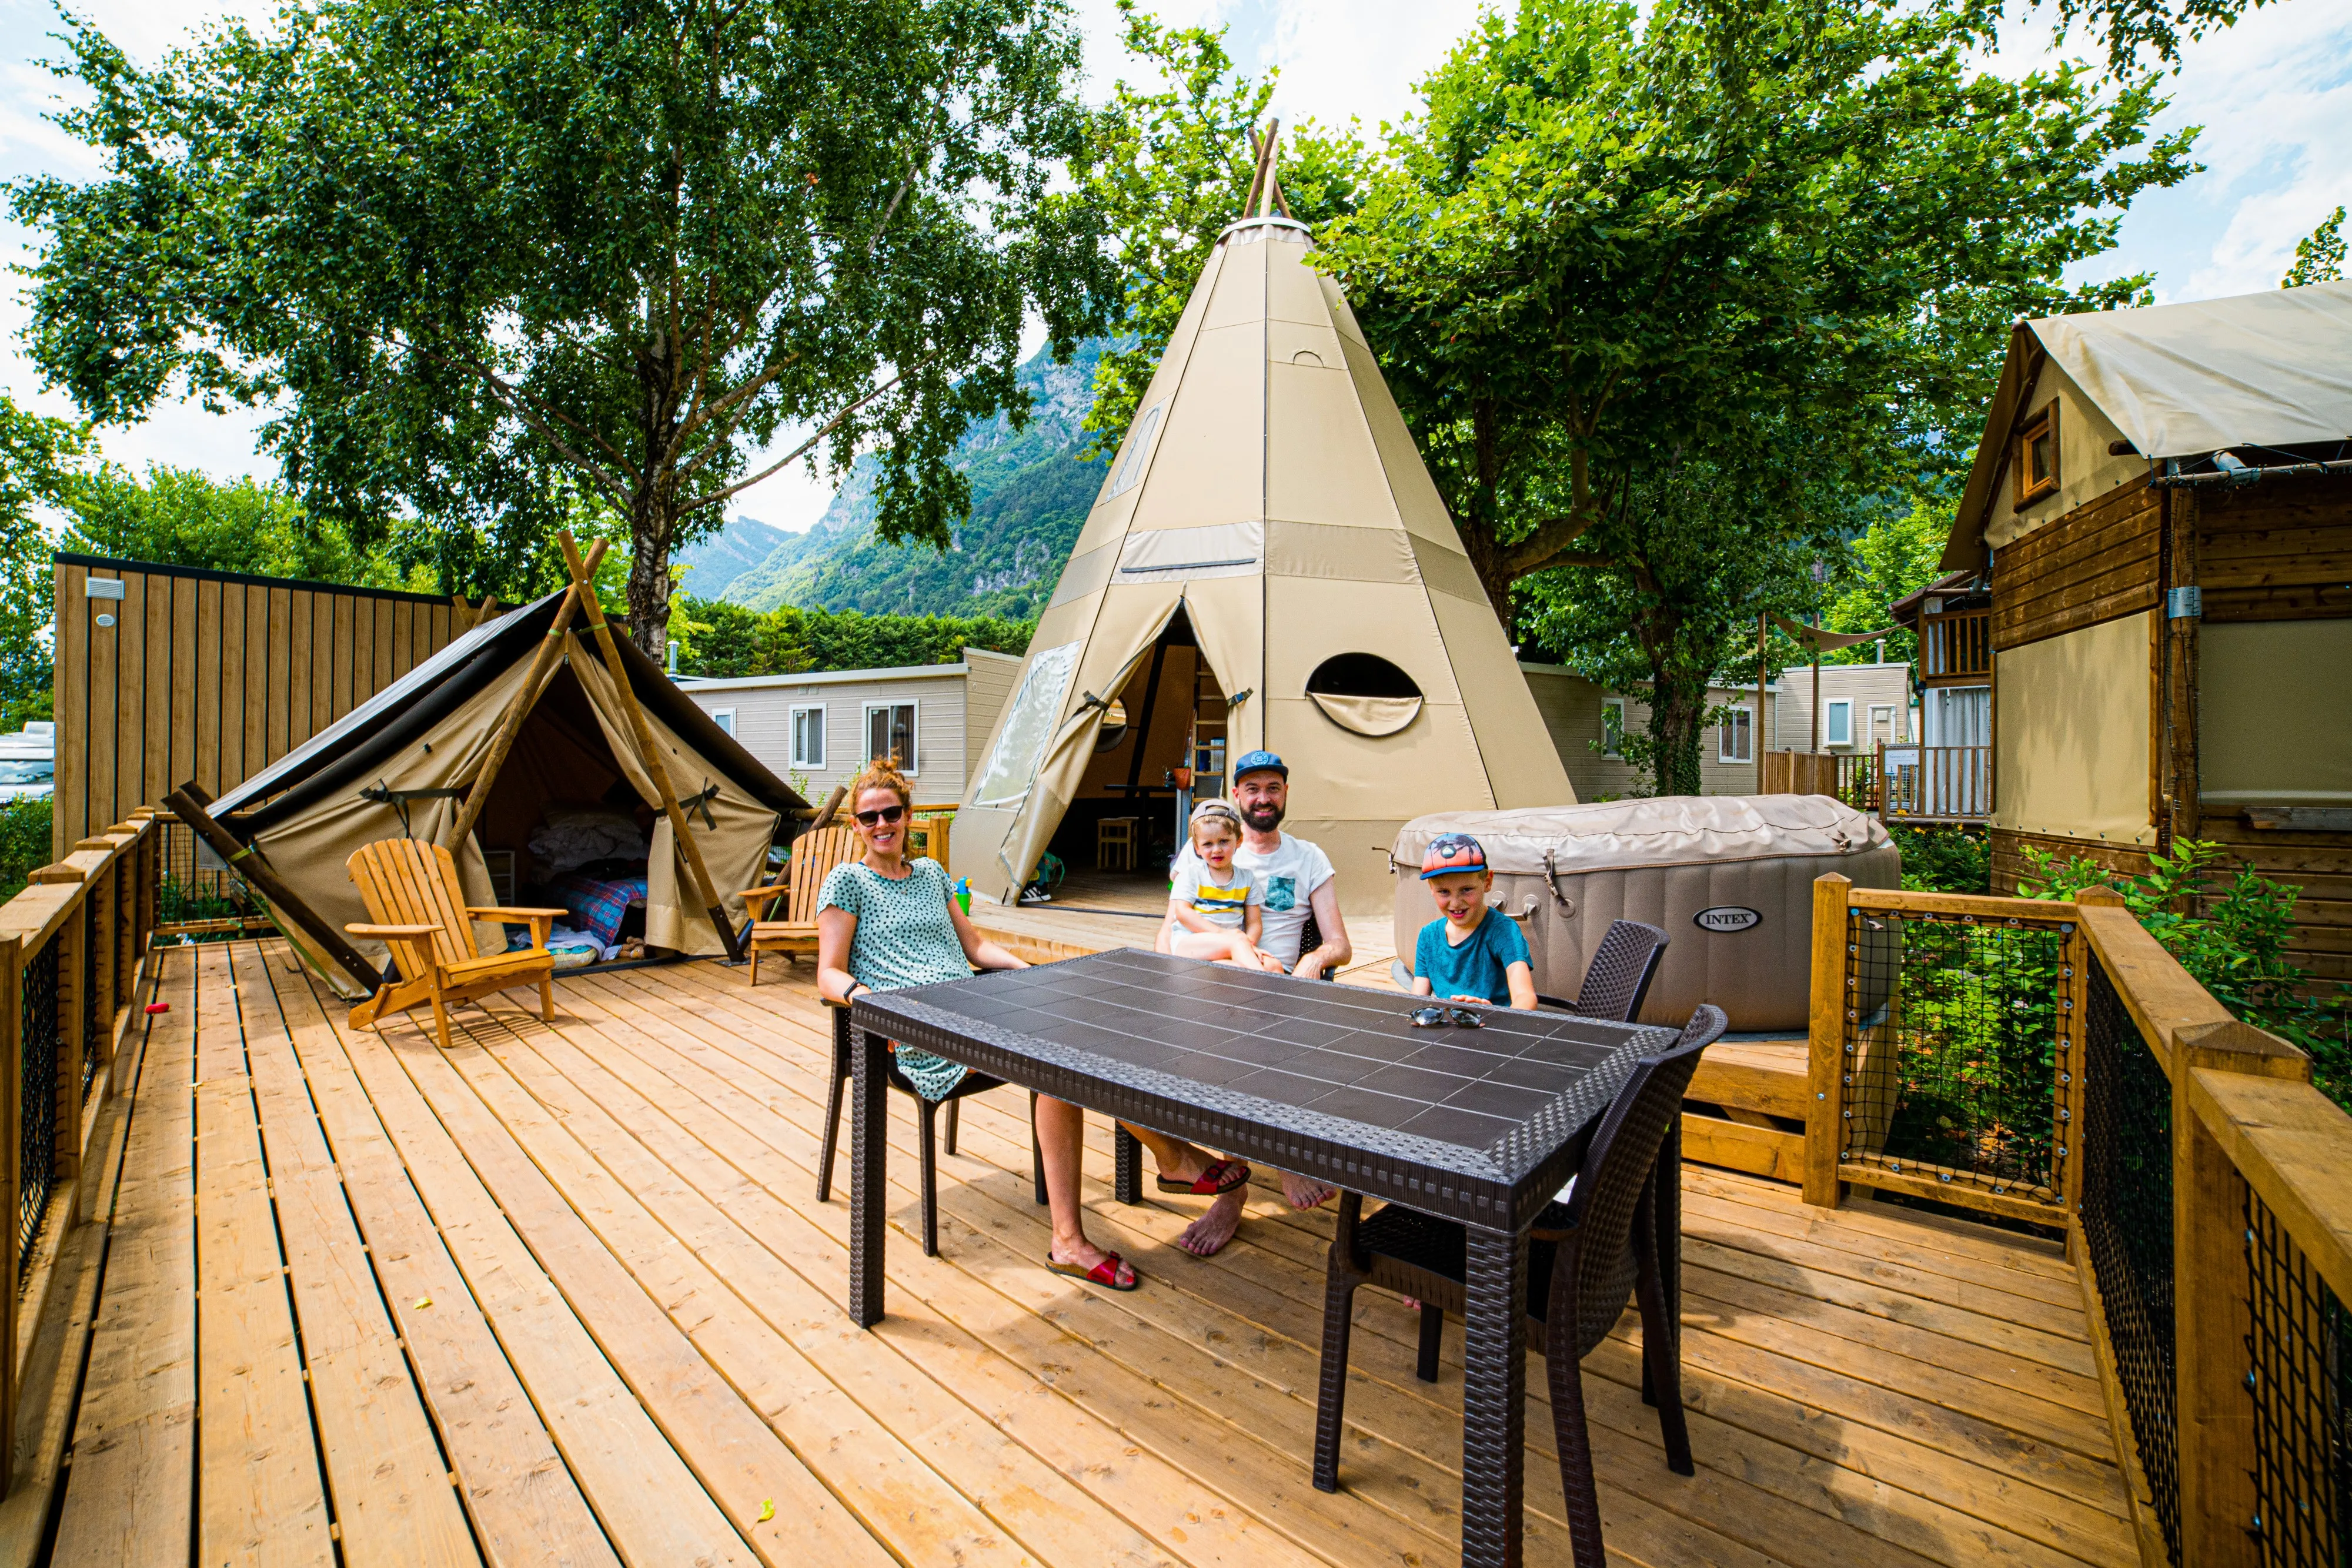 Discover the Tipi Lodge: the real glamping tent for your open-air holiday!